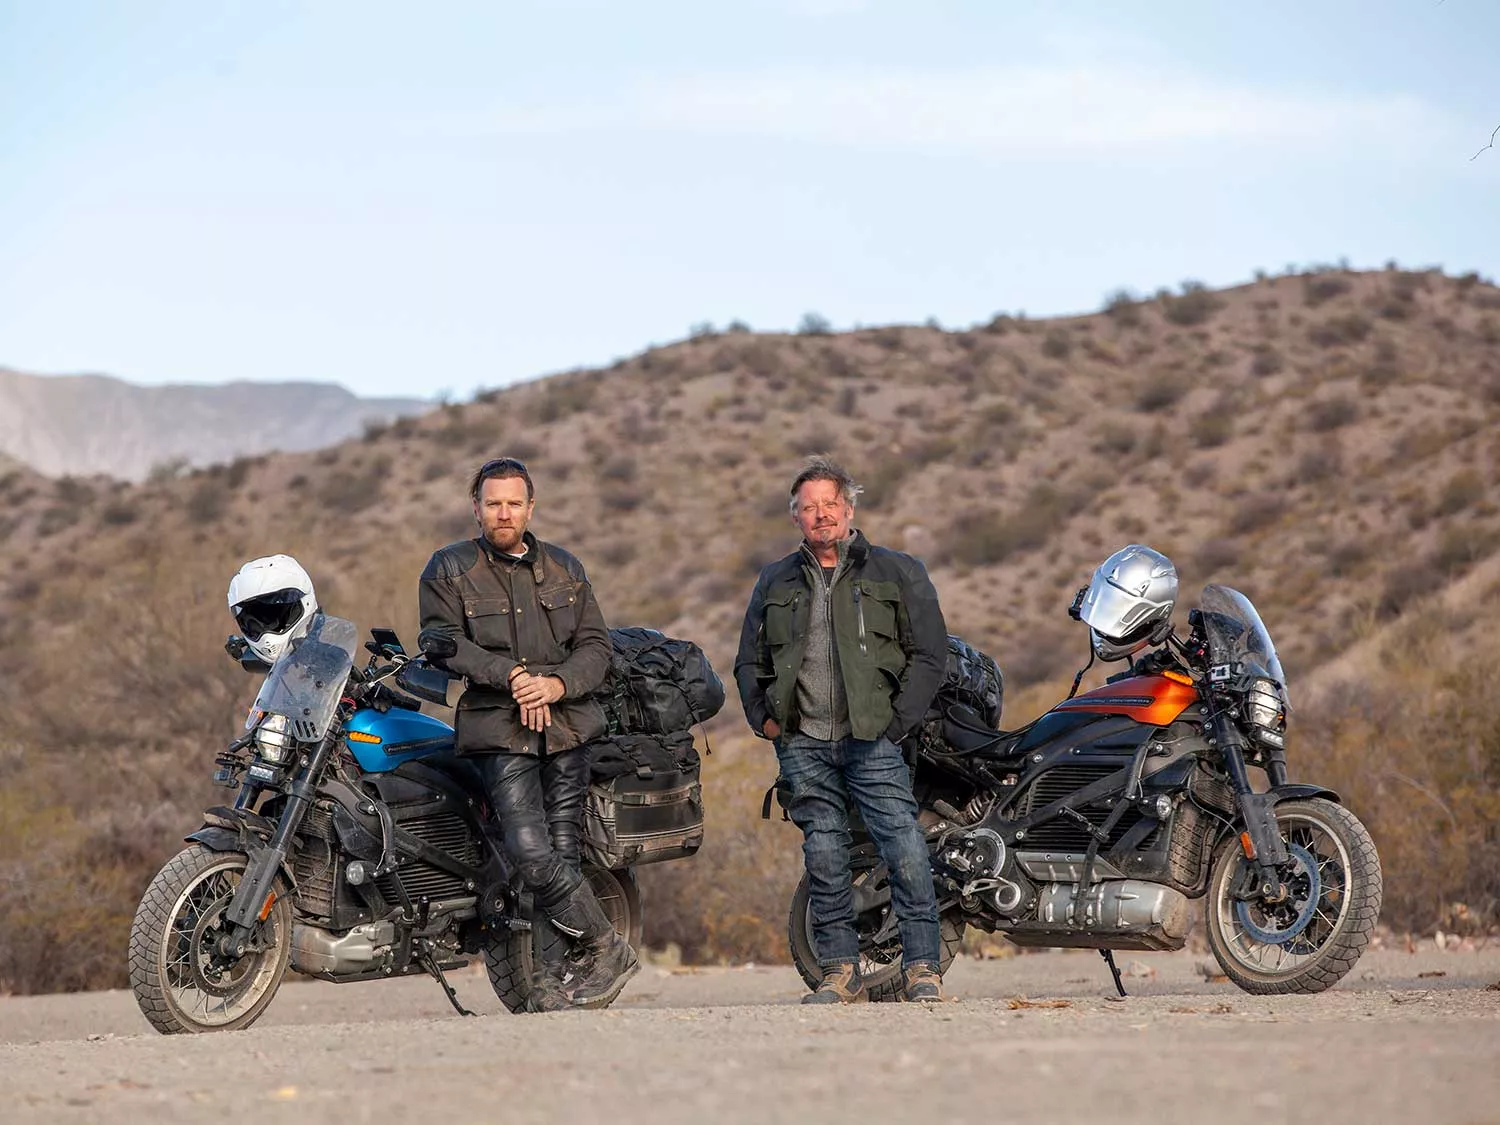 Ewan McGregor and Charley Boorman rode LiveWires 13,000 miles in 100 days in the Long Way Up series.